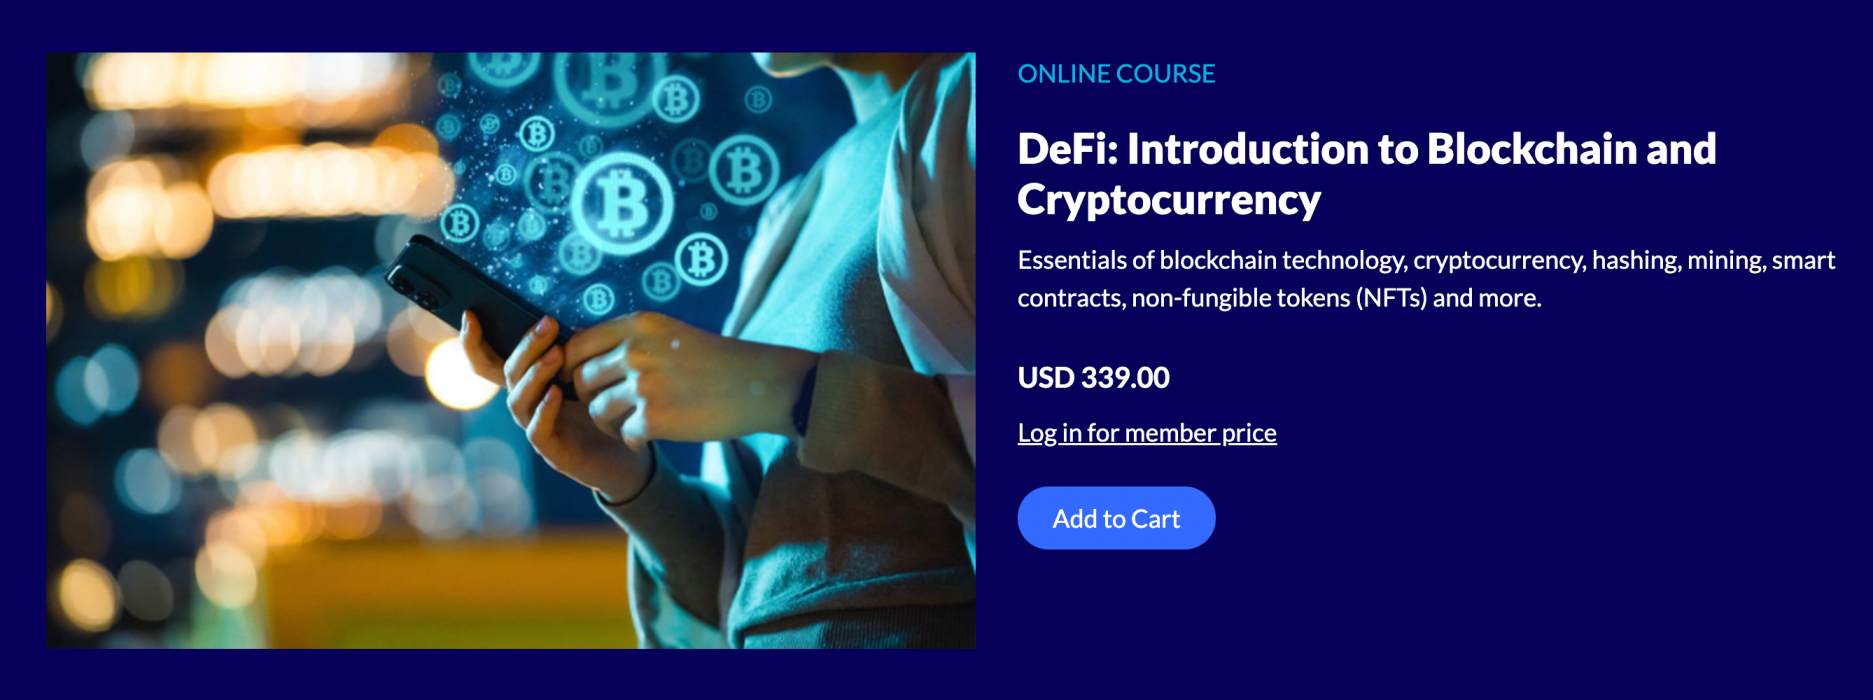 DeFi: Introduction to Blockchain and Cryptocurrency 